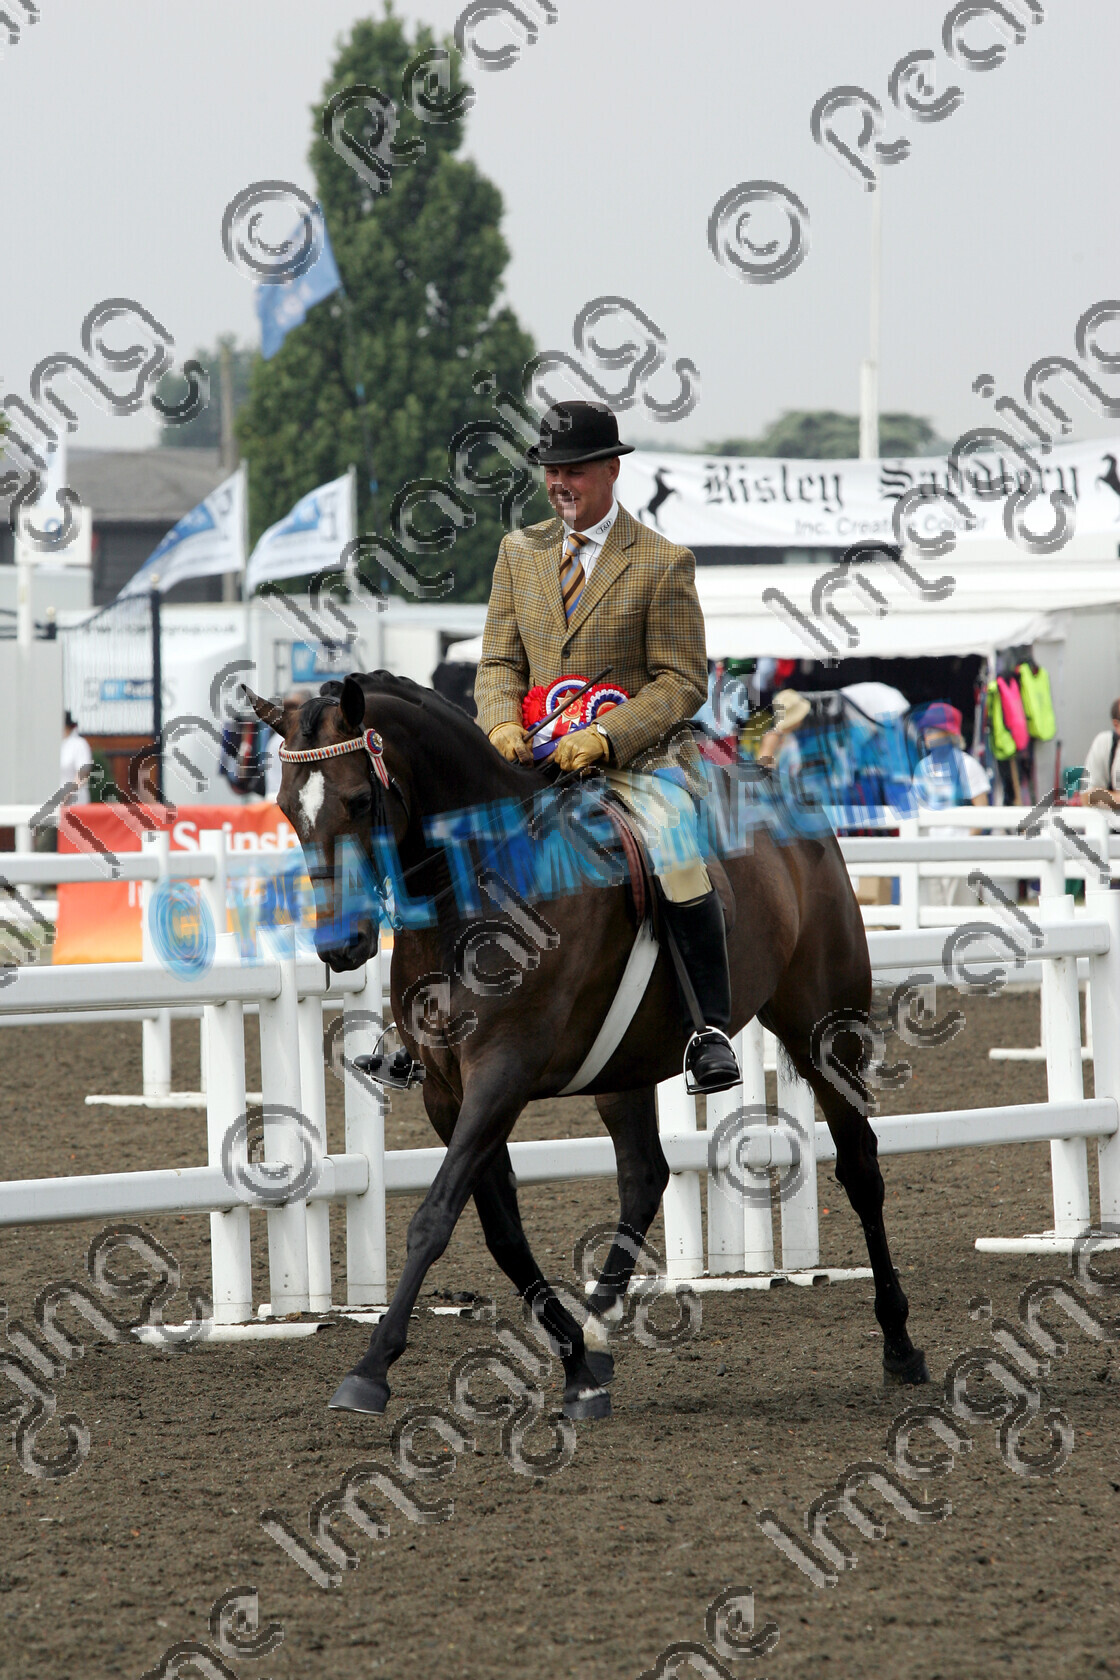 S06-32-3-109 copy 
 Keywords: The Royal Show rosette rosettes prize winner horse pony show showing Tuesday 4 July 2006 championship champion ridden mounted trot trotting action moving flat first best 451 Secret Garden ridden by Allister Hood, Molly Lewin small hack brown mare